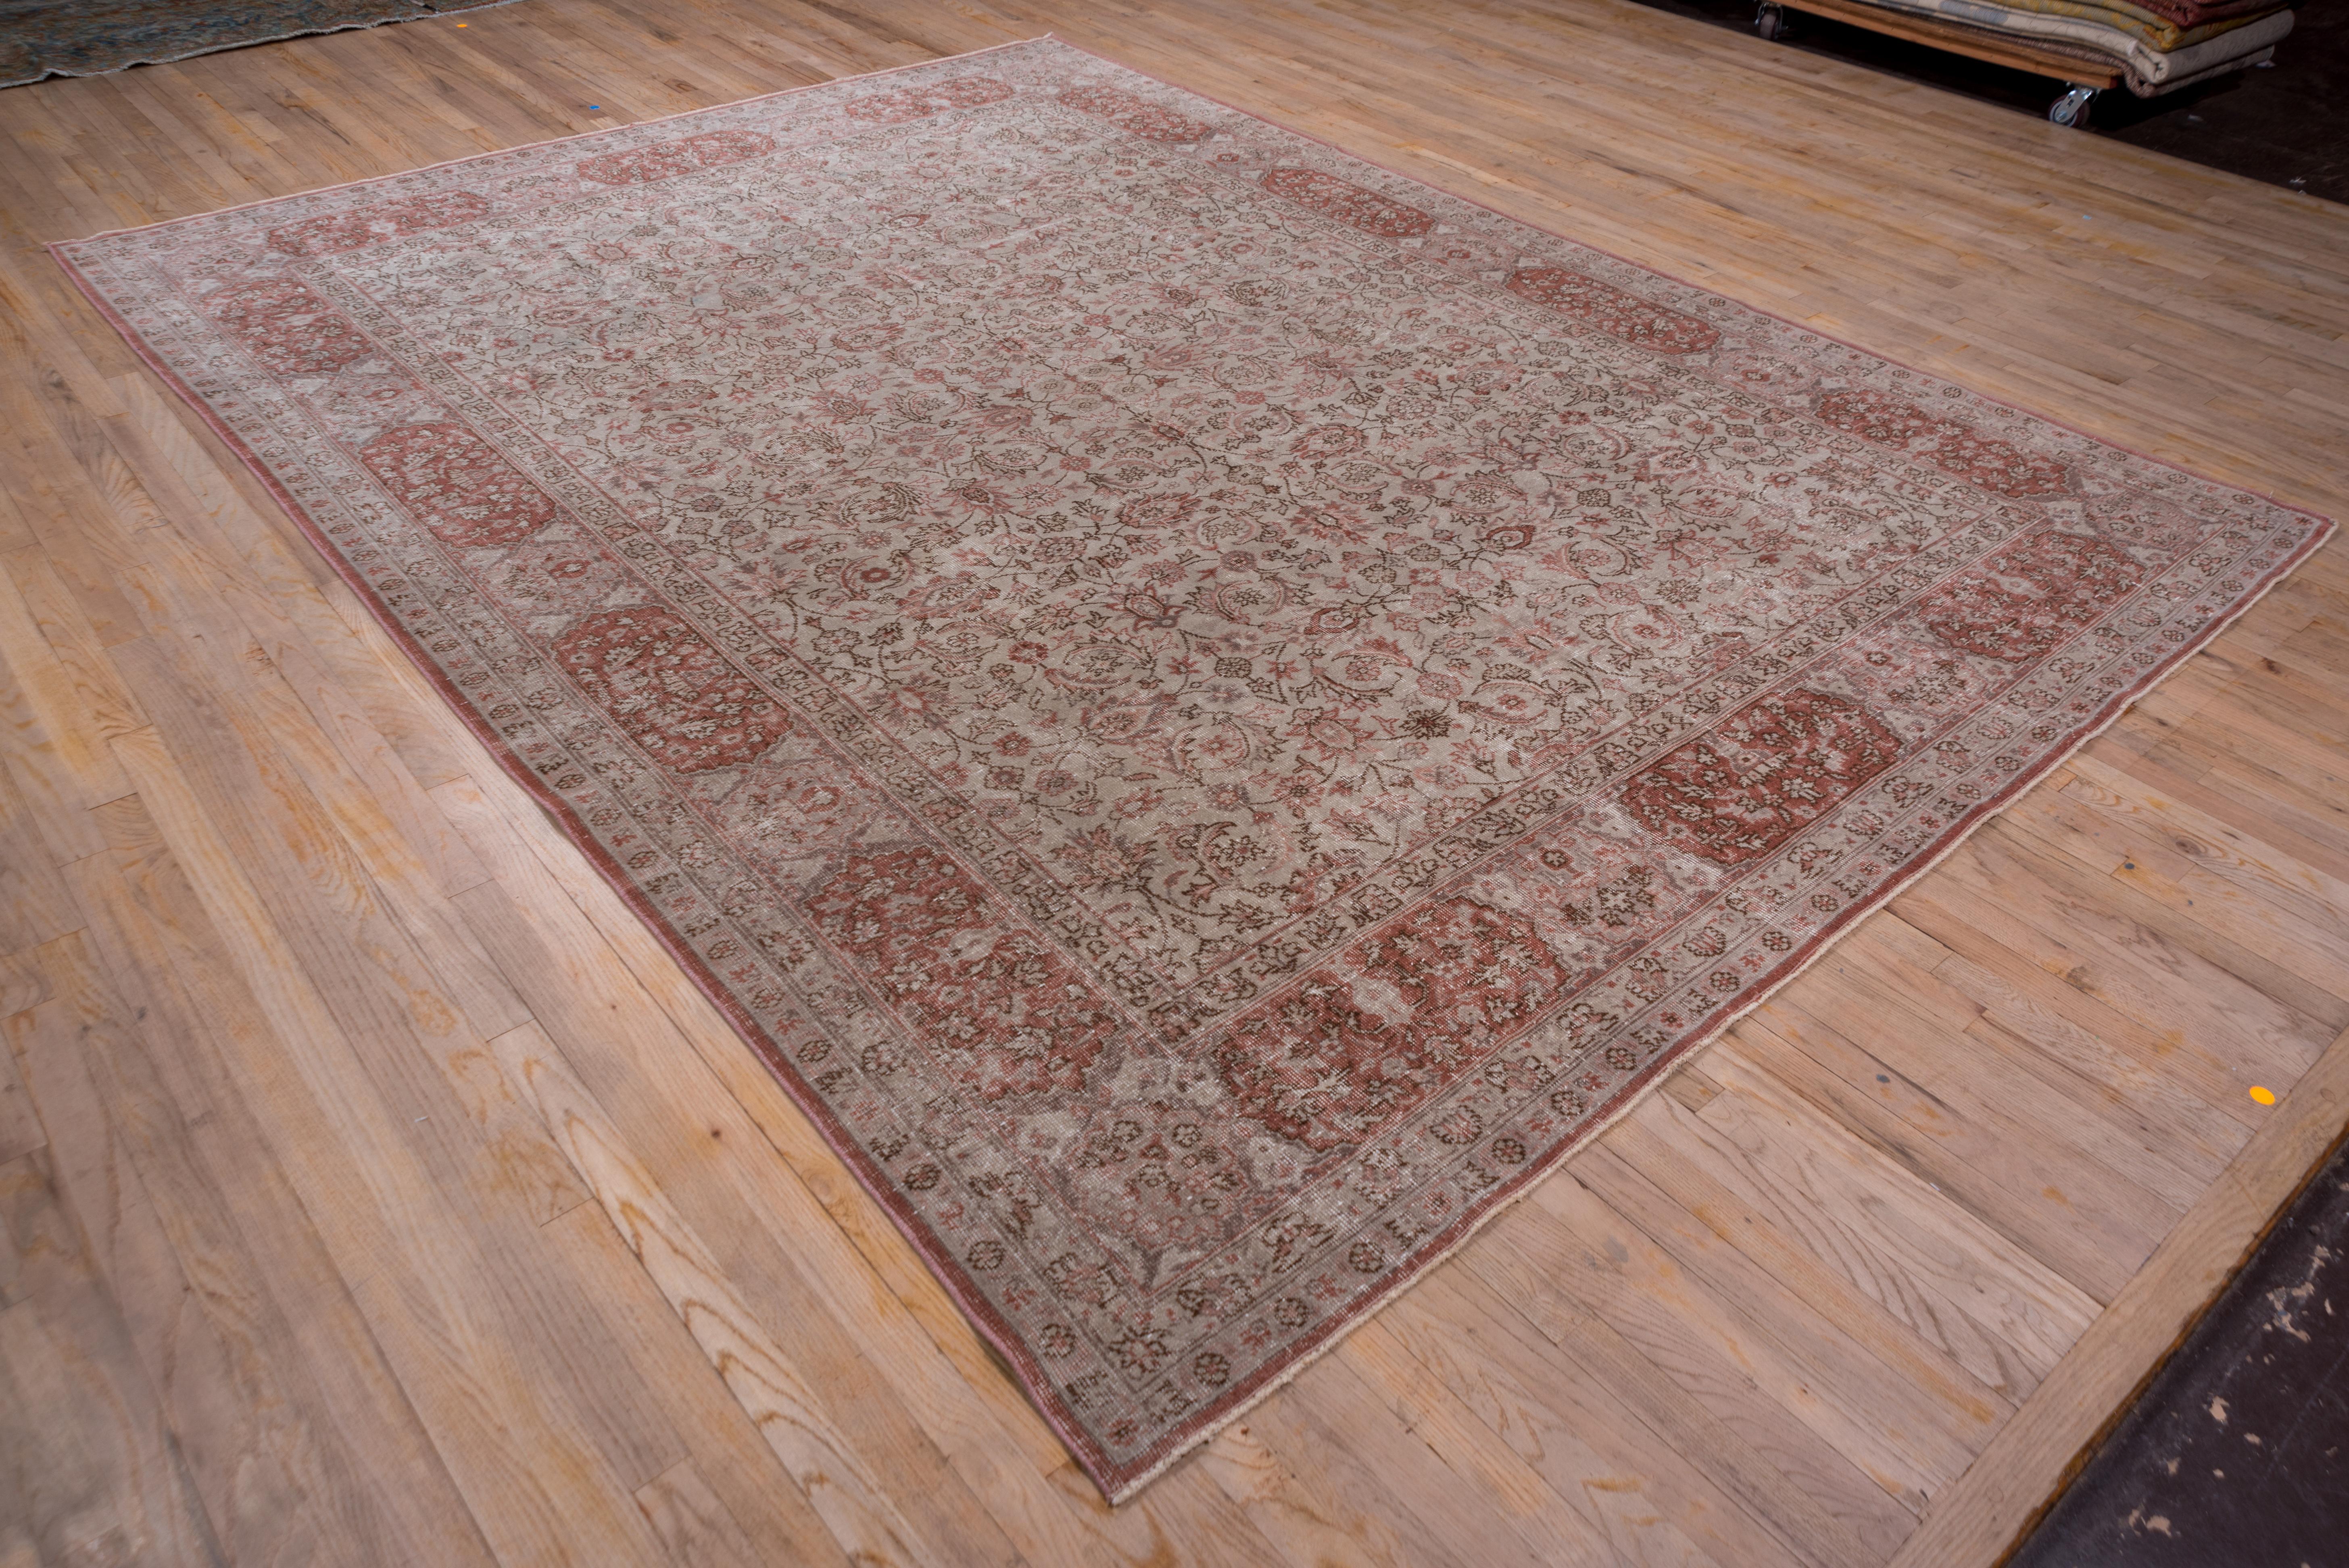 Antique Turkish Oushak Rug, Red Borders, Taupe Allover Field, circa 1940s For Sale 6